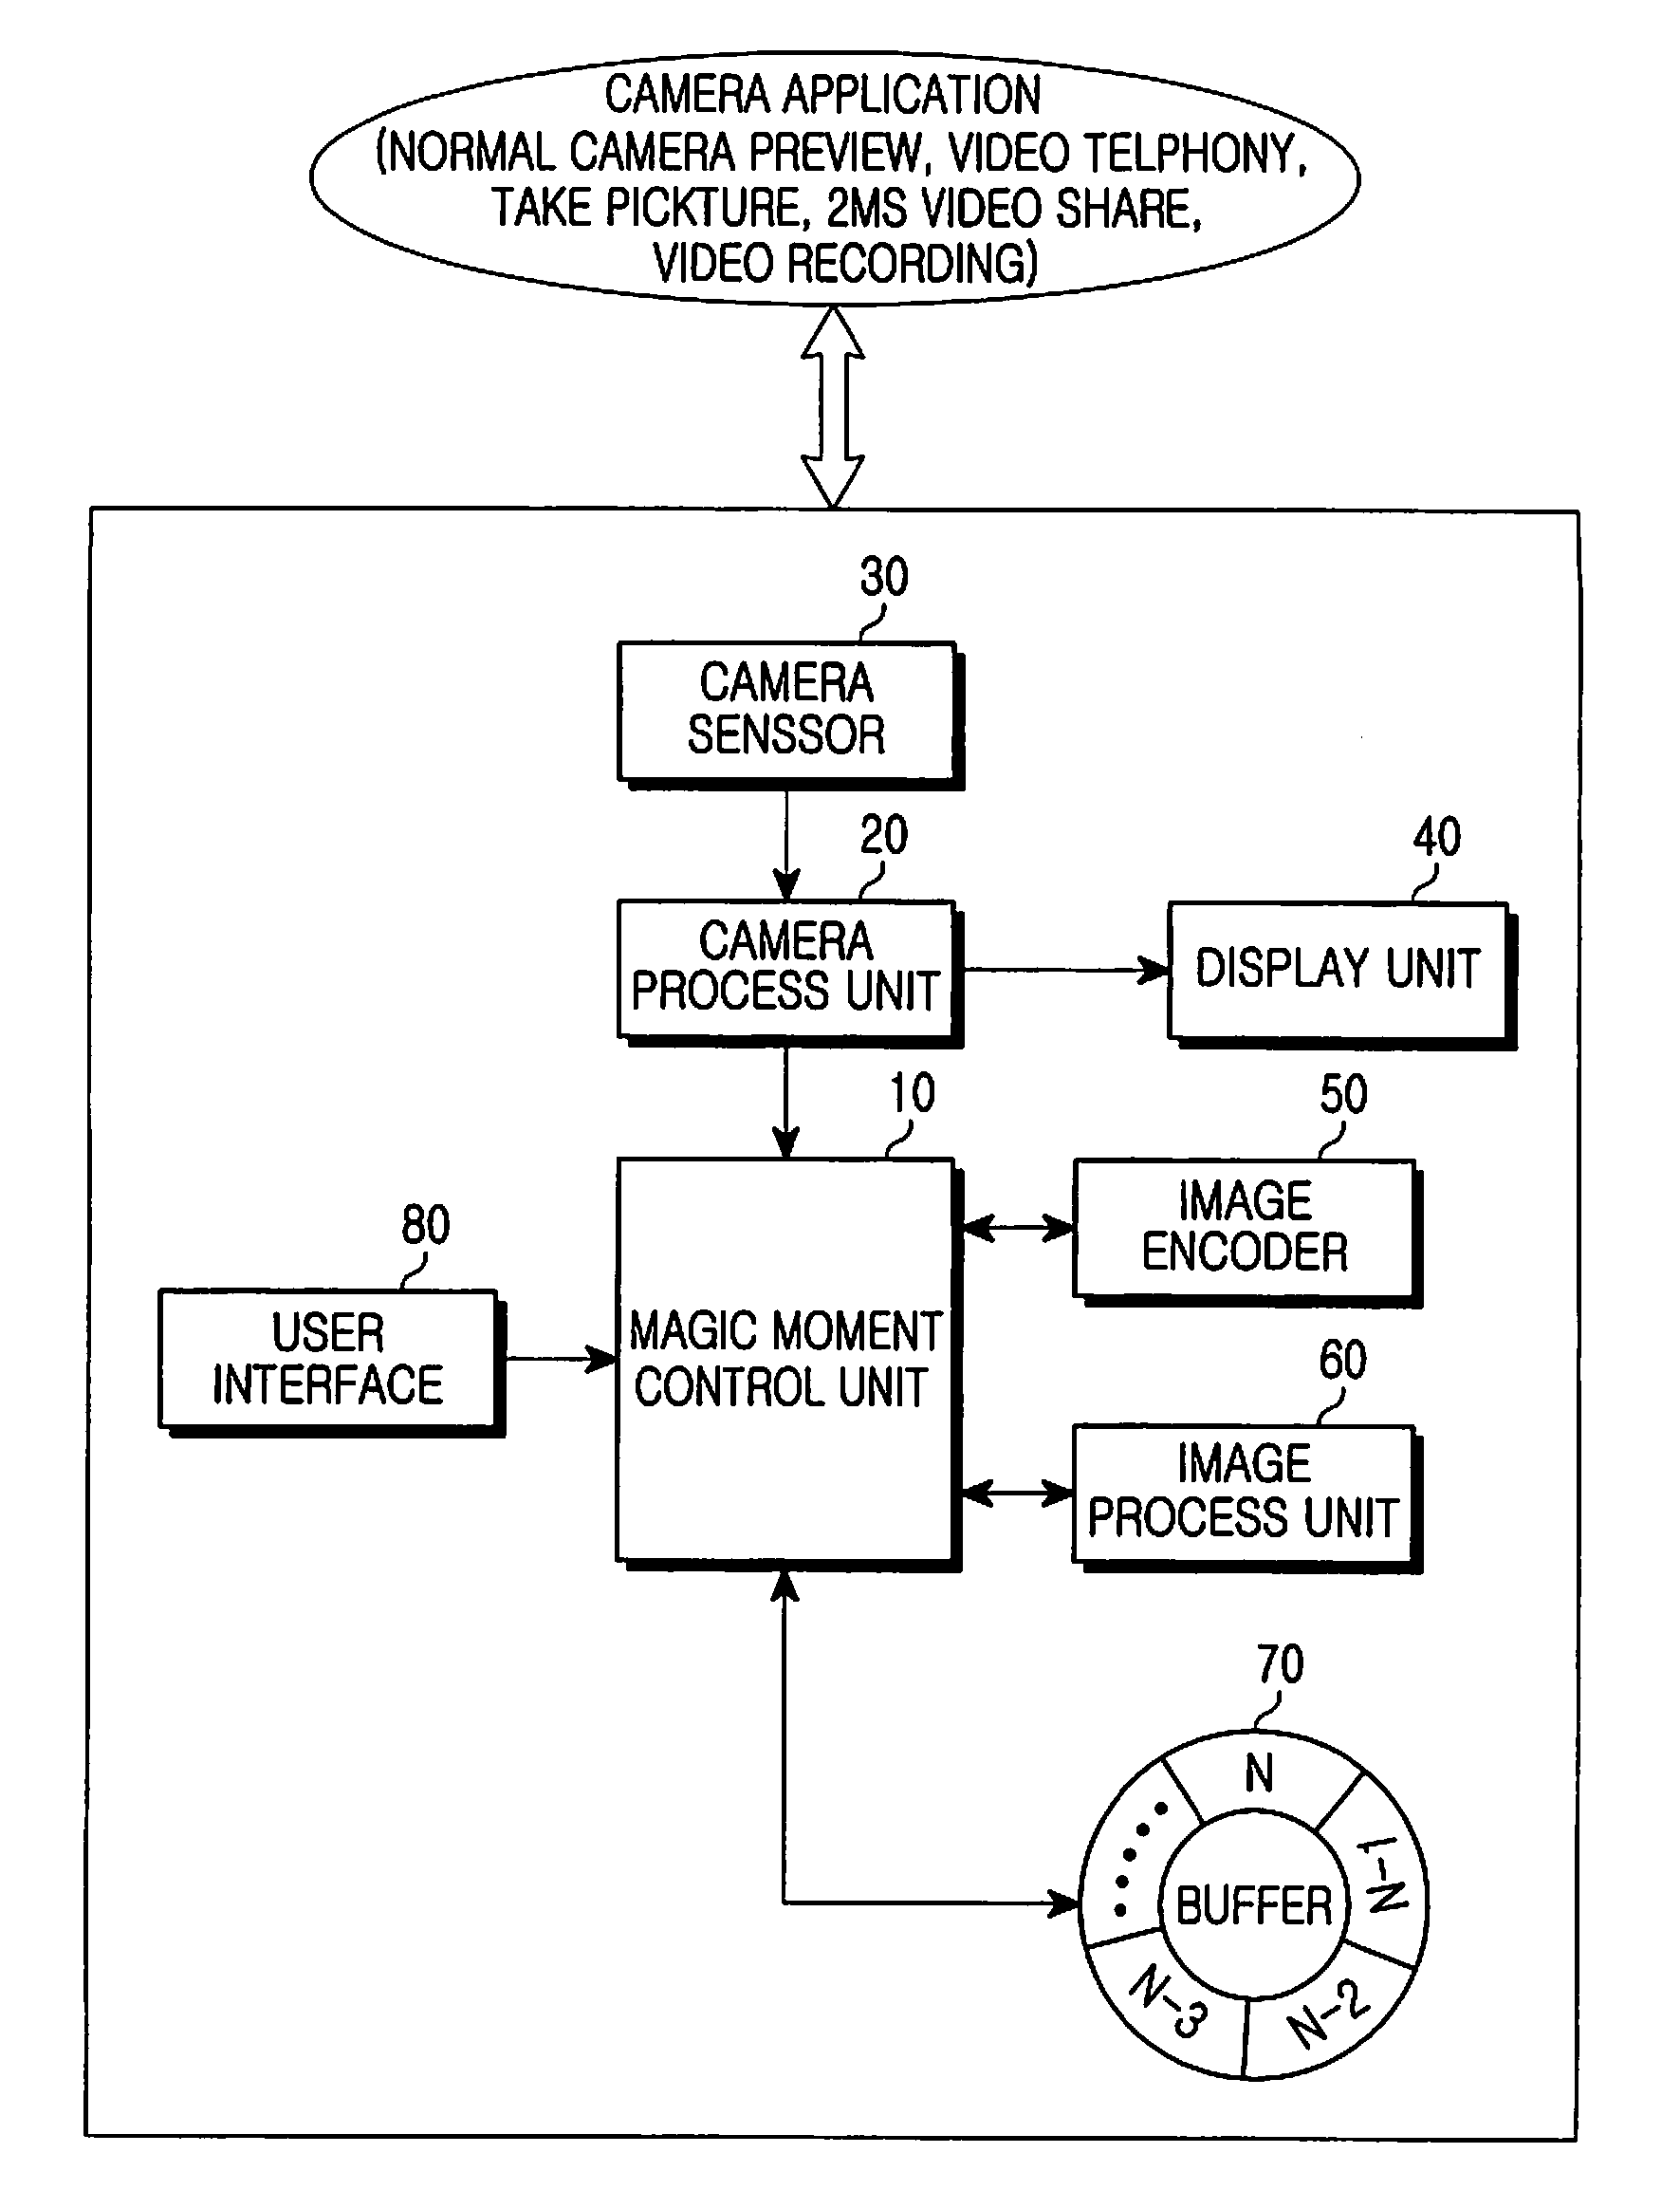 Method and apparatus for automatic image management